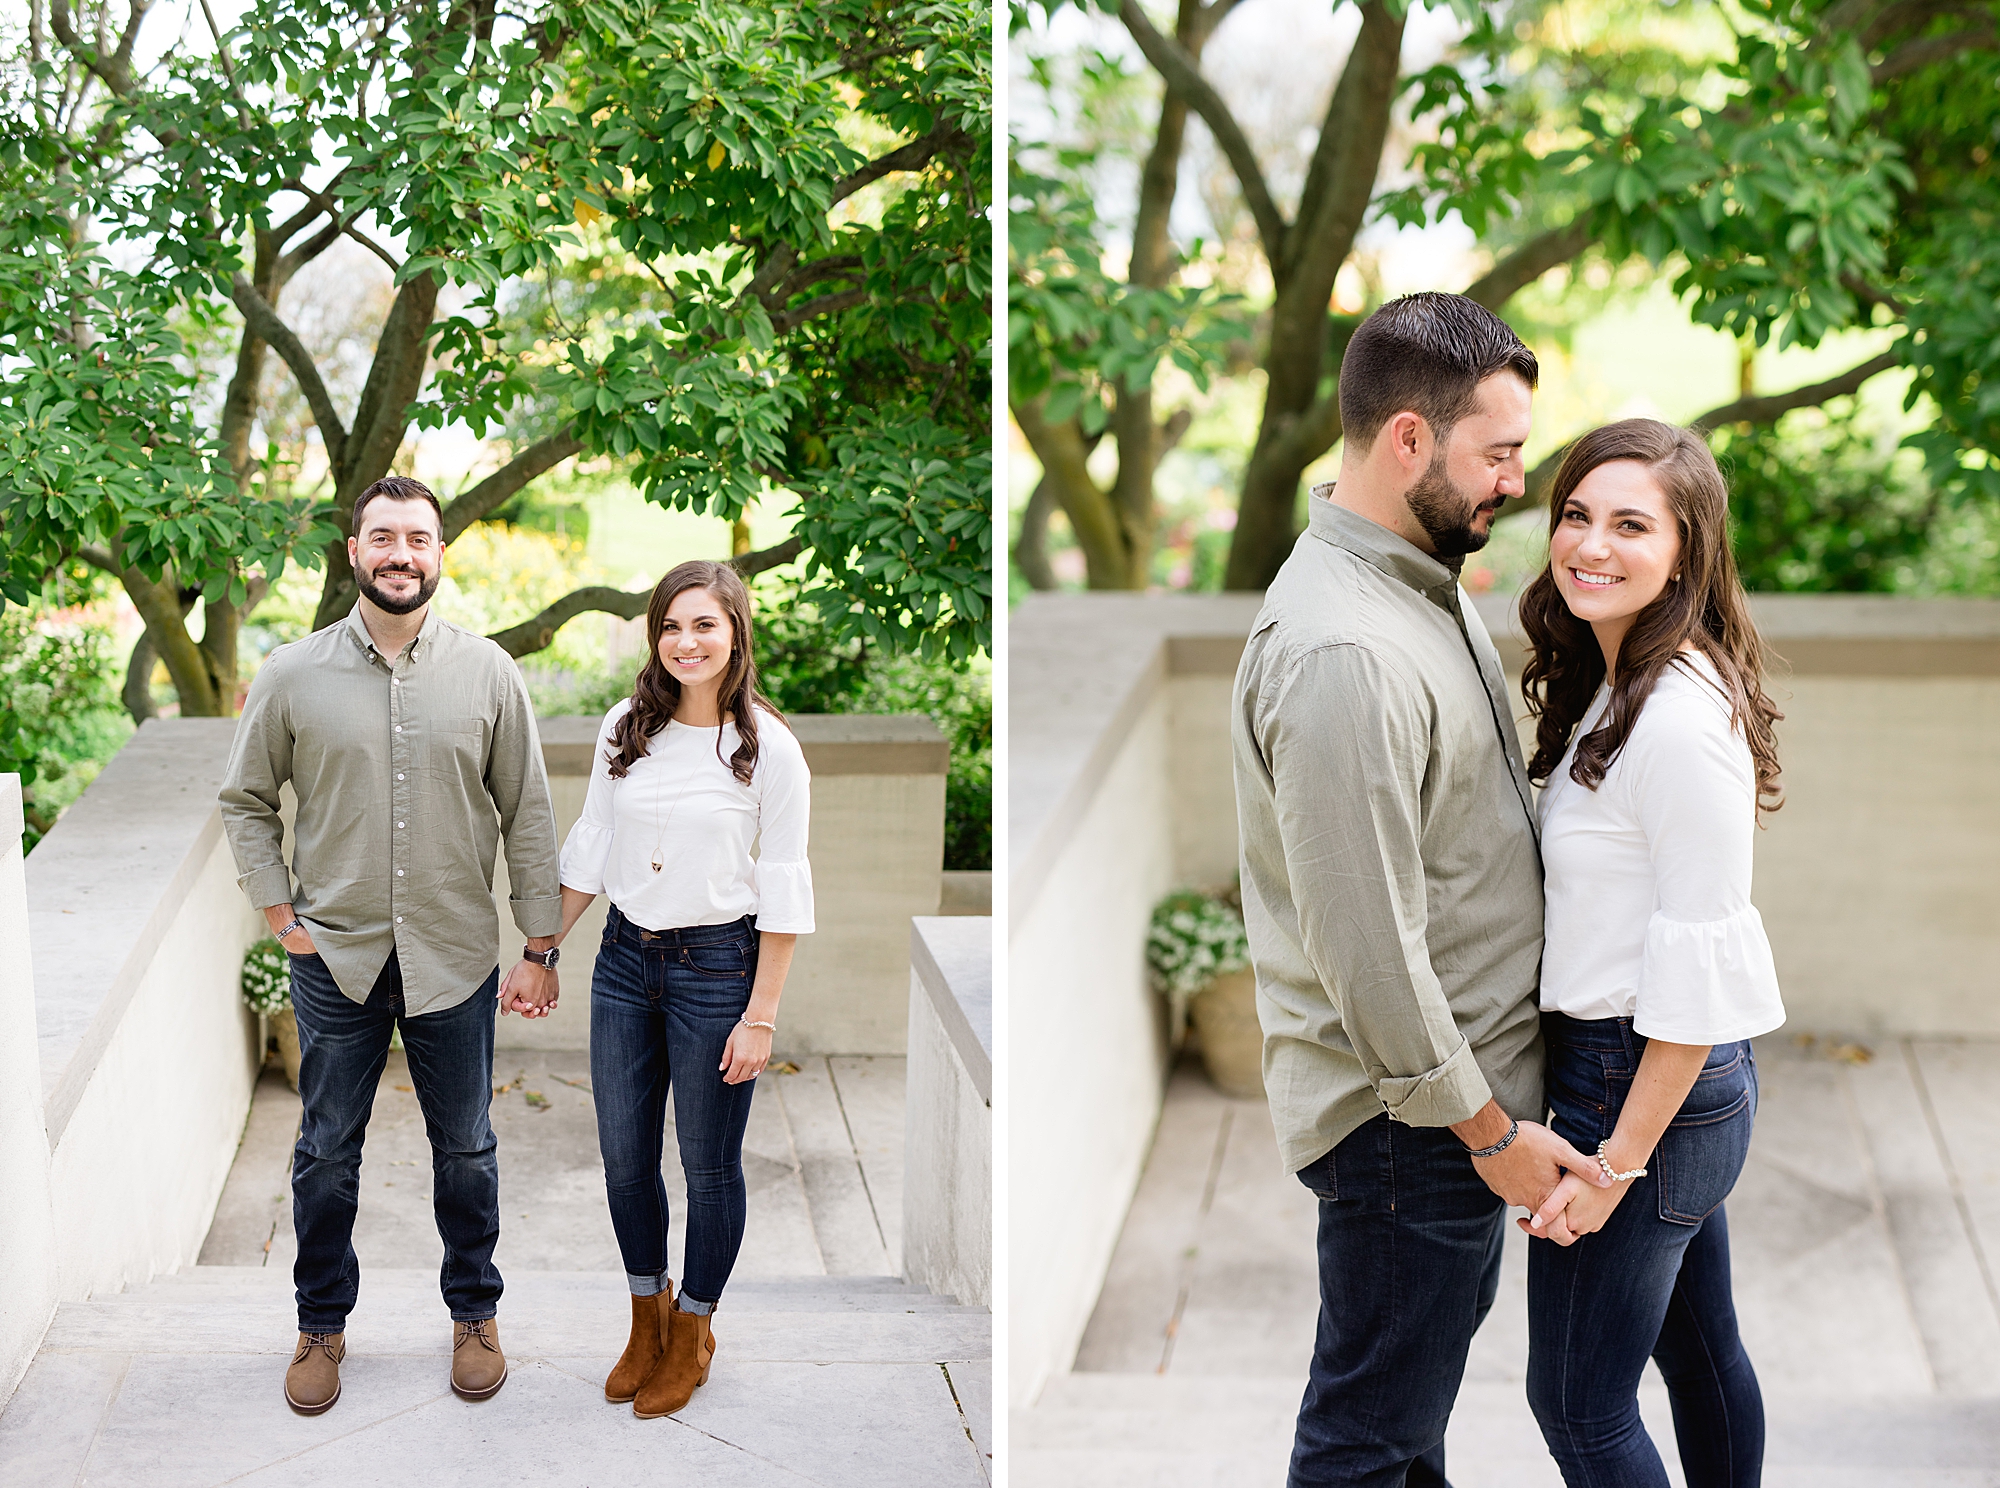 Fall Engagement Session at The War Memorial Grosse Pointe - Breanne Rochelle Photography